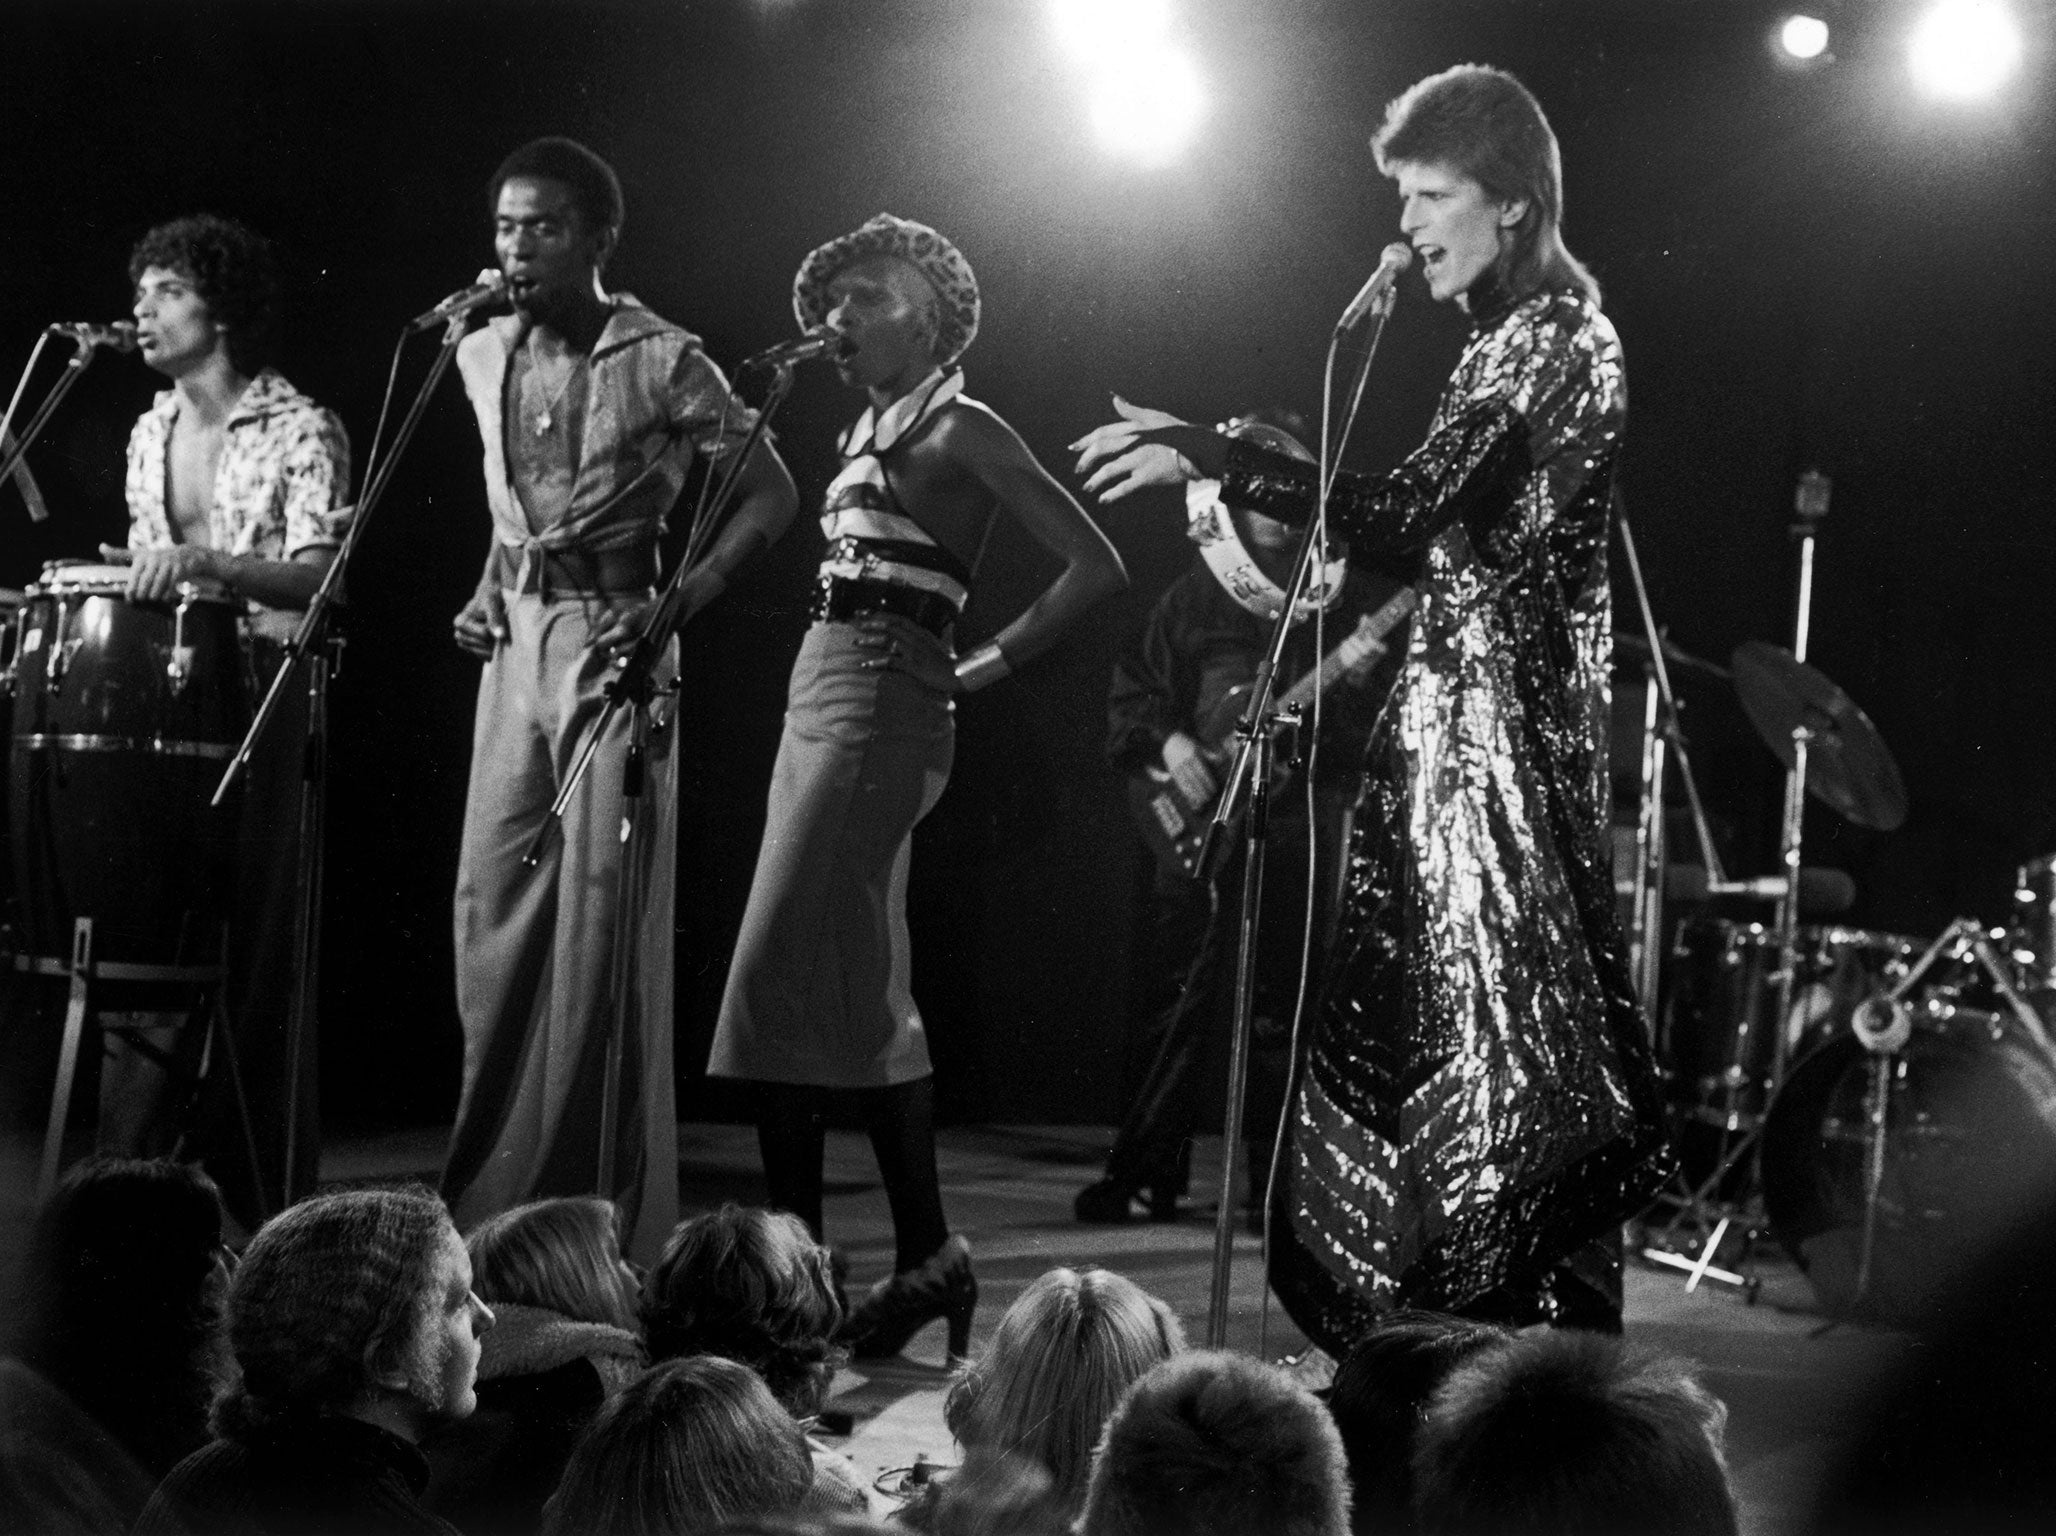 English singer David Bowie (right) performing at a live recording for a Midnight Special TV show made at The Marquee Club in London with a specially invited audience of Bowie fanclub members, 21st October 1973. Bowie is wearing a 'space-samurai' costume by Kansai Yamamoto